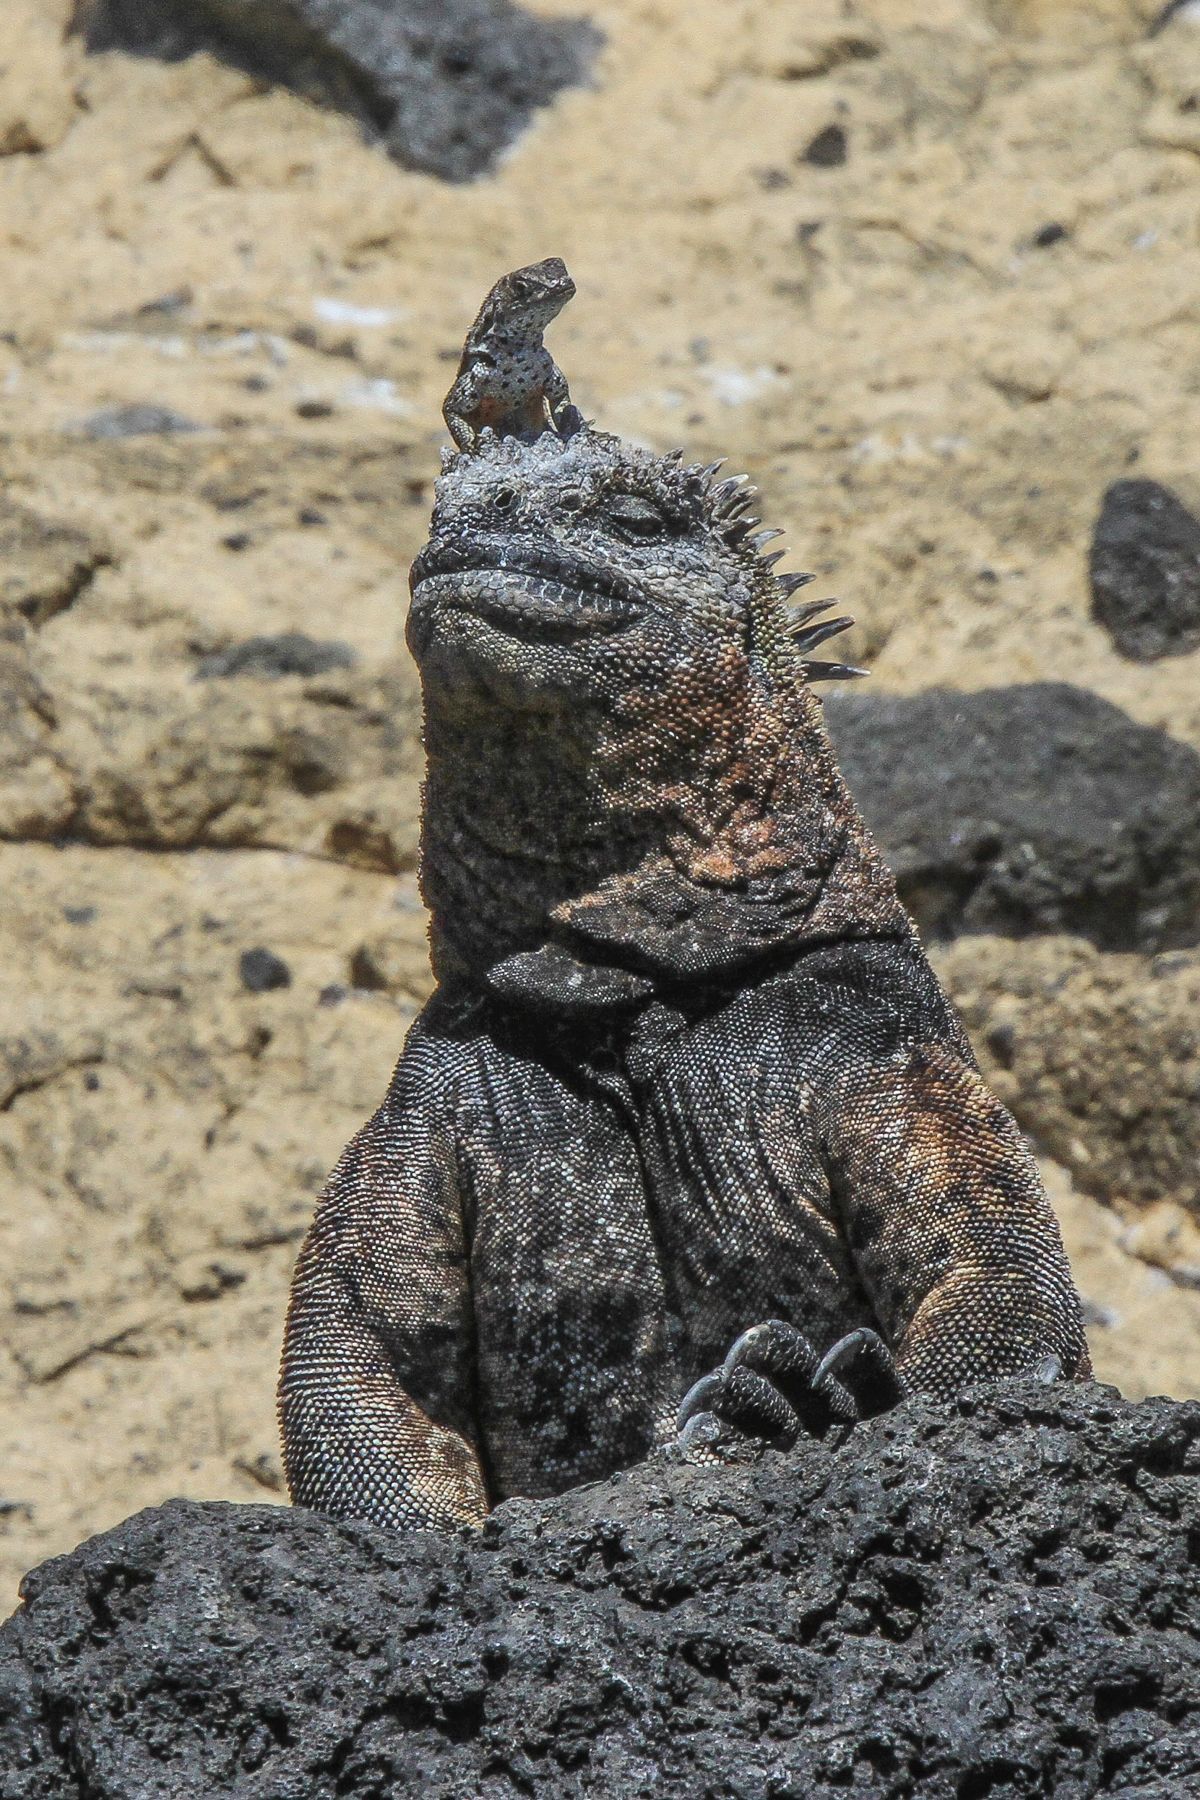 Or one of those creepy little lava lizards wants to play 'king of the castle'